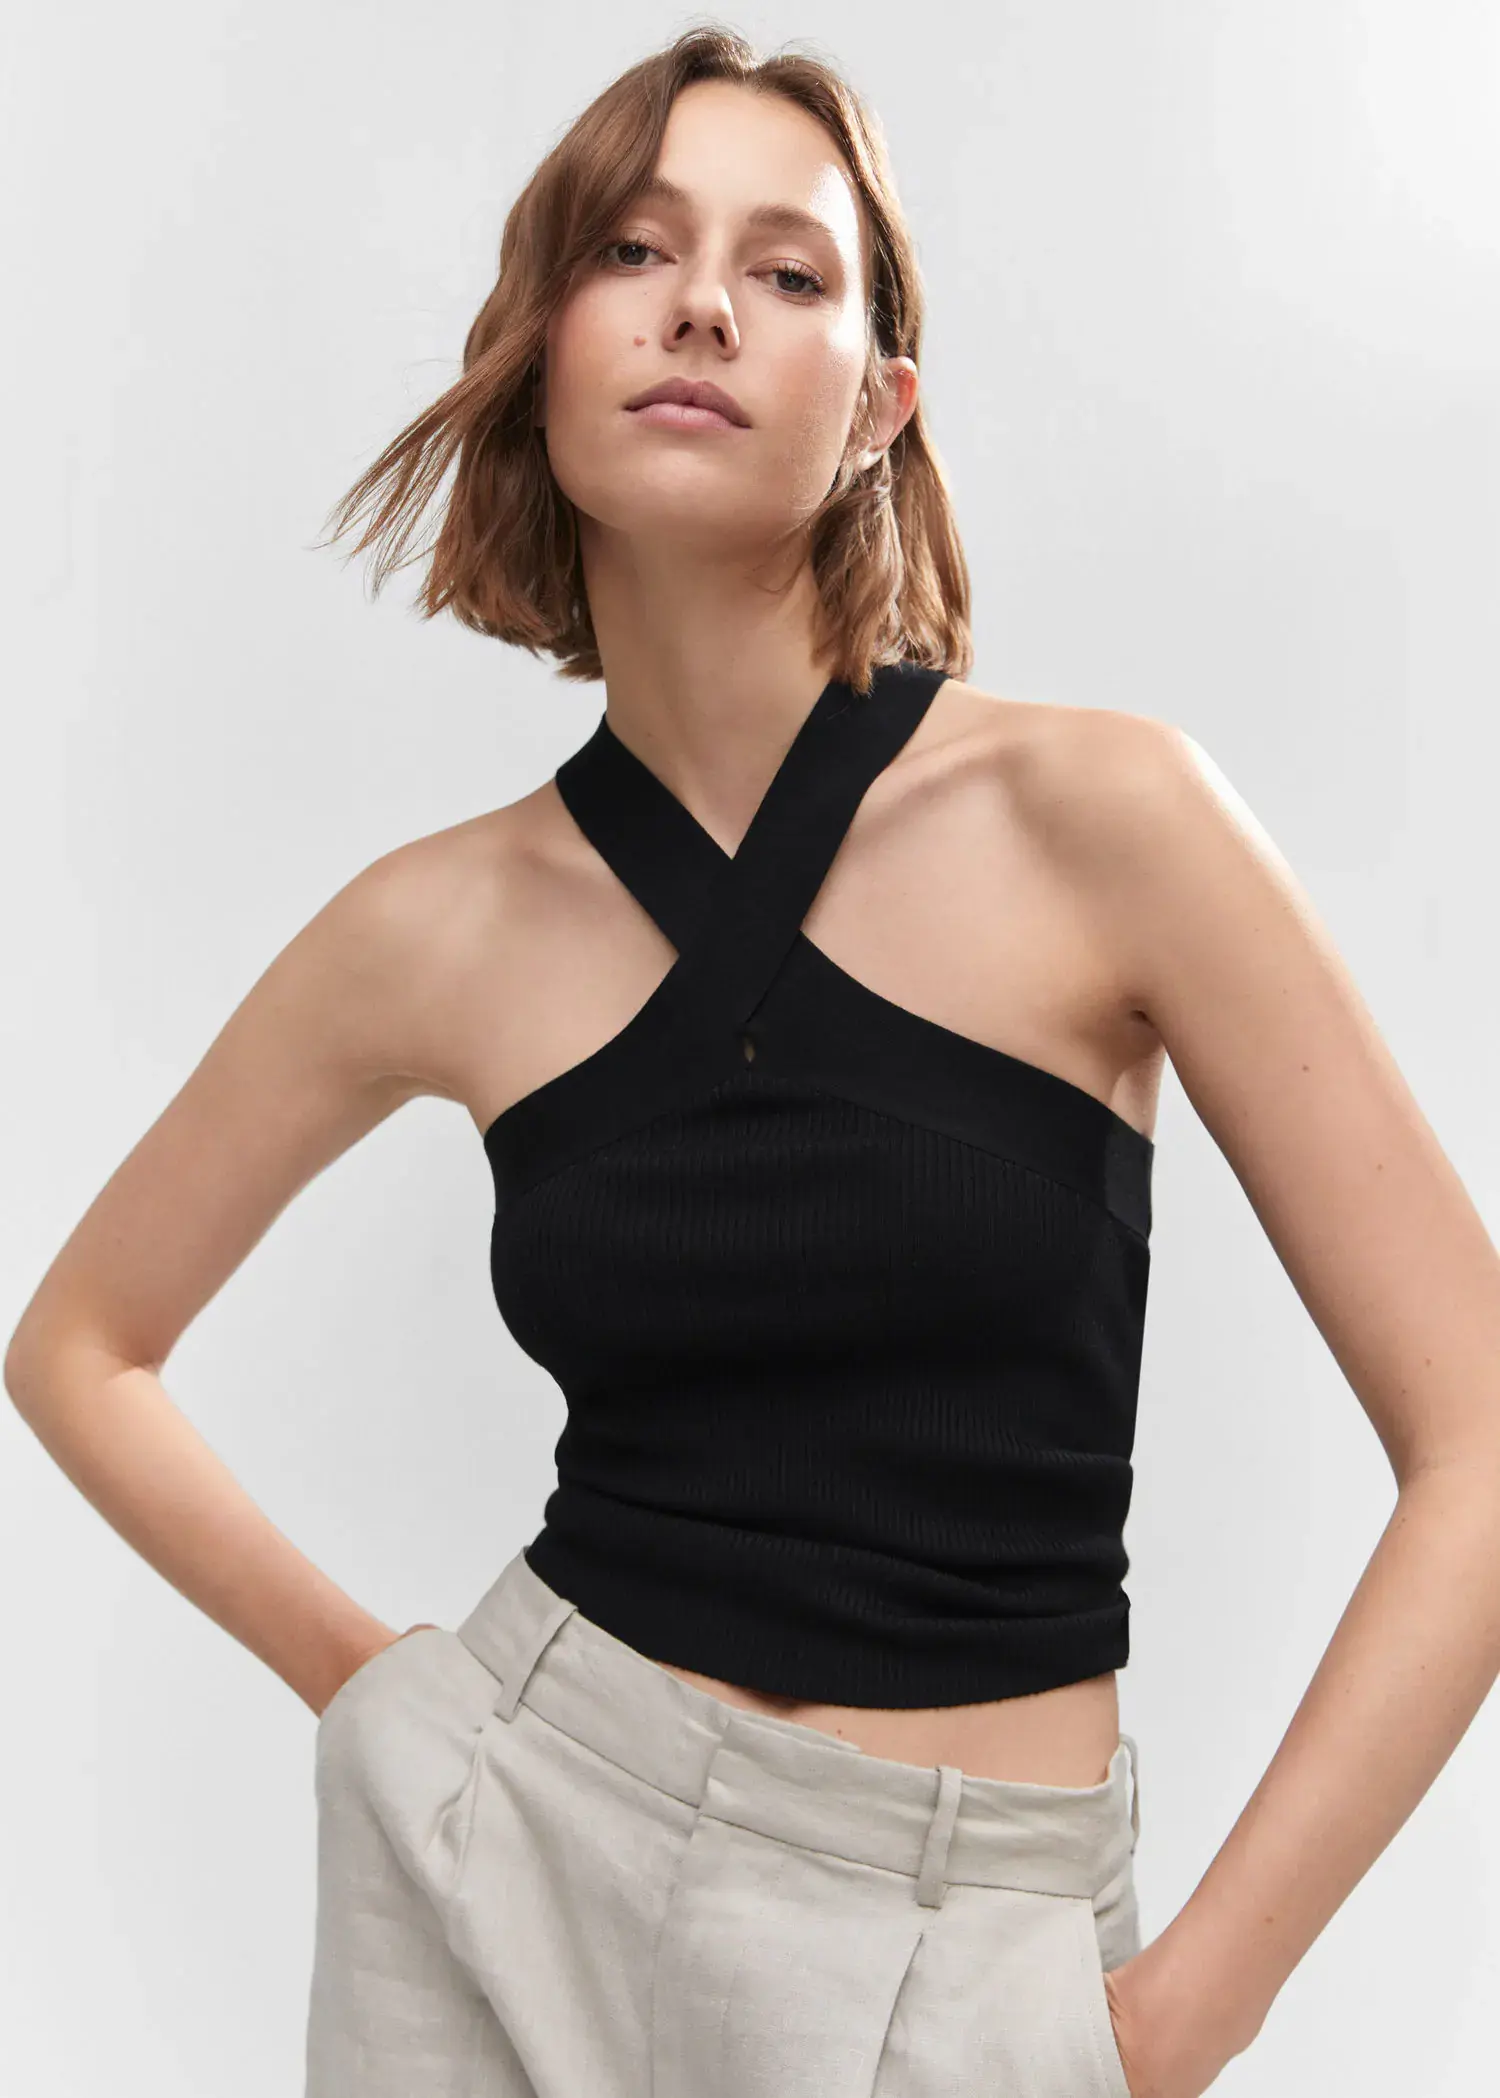 Mango Halter-neck knitted top. a woman wearing a black halter top posing for a picture. 